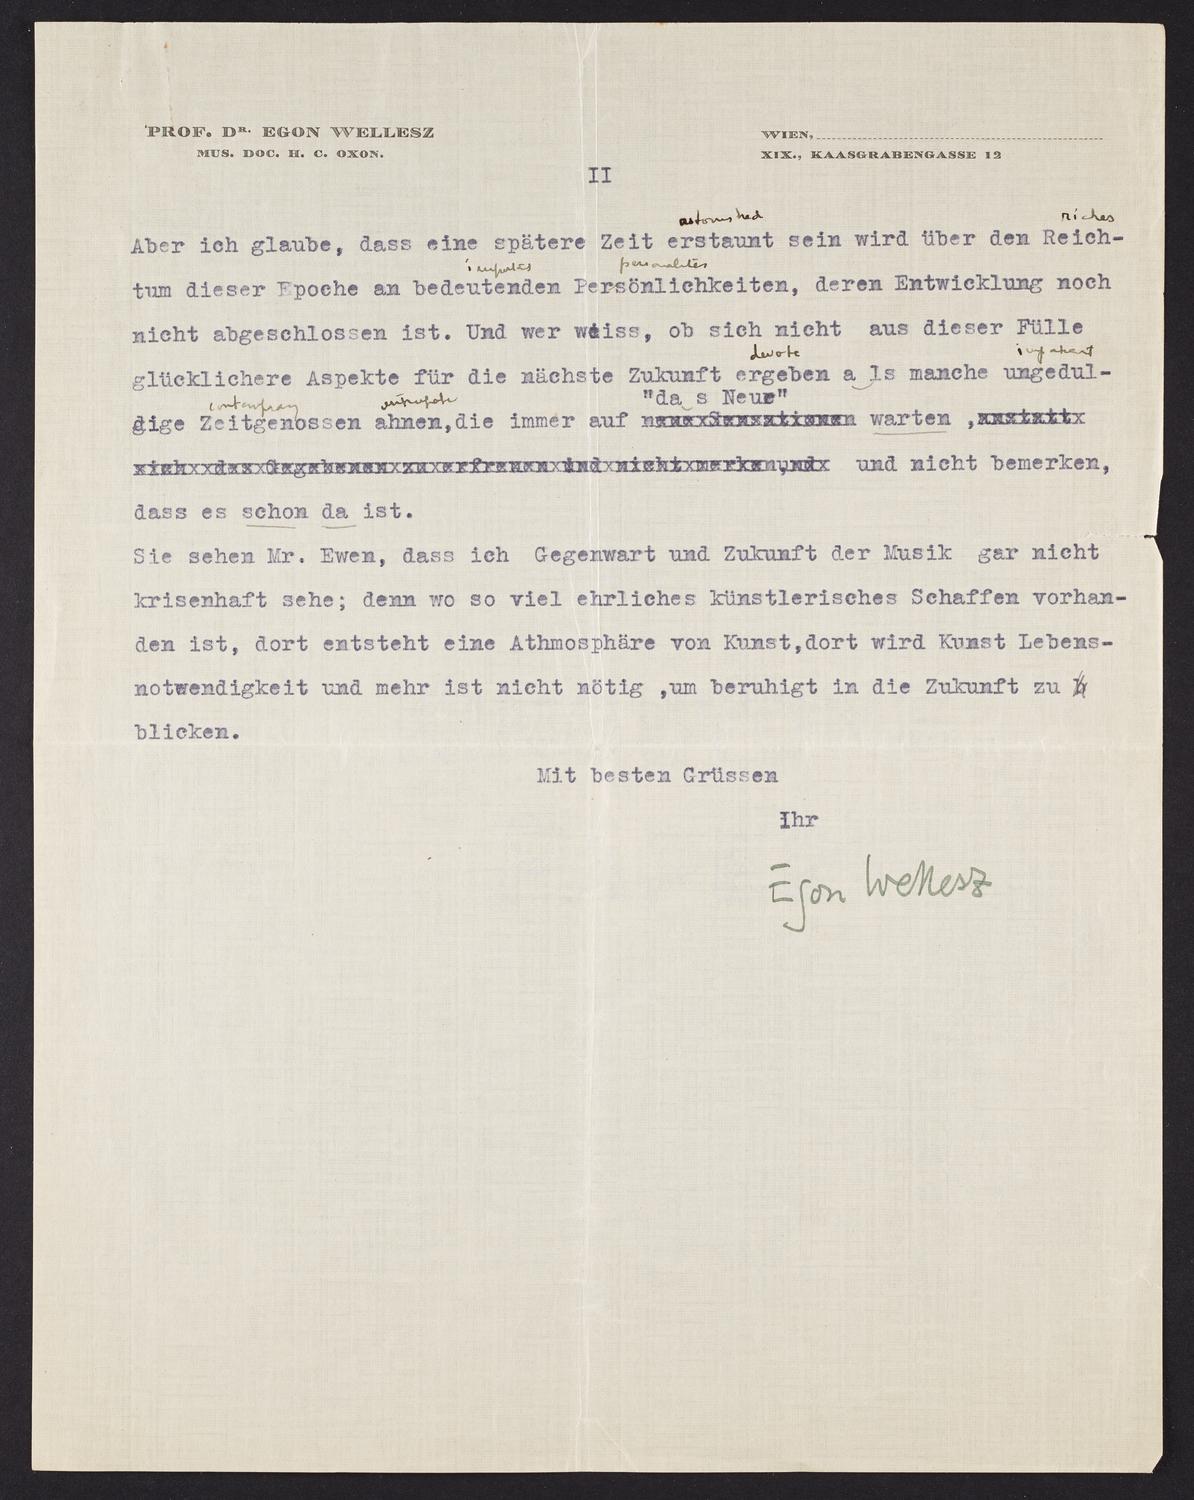 Correspondence from Egon Wellesz to David Ewen, page 2 of 2